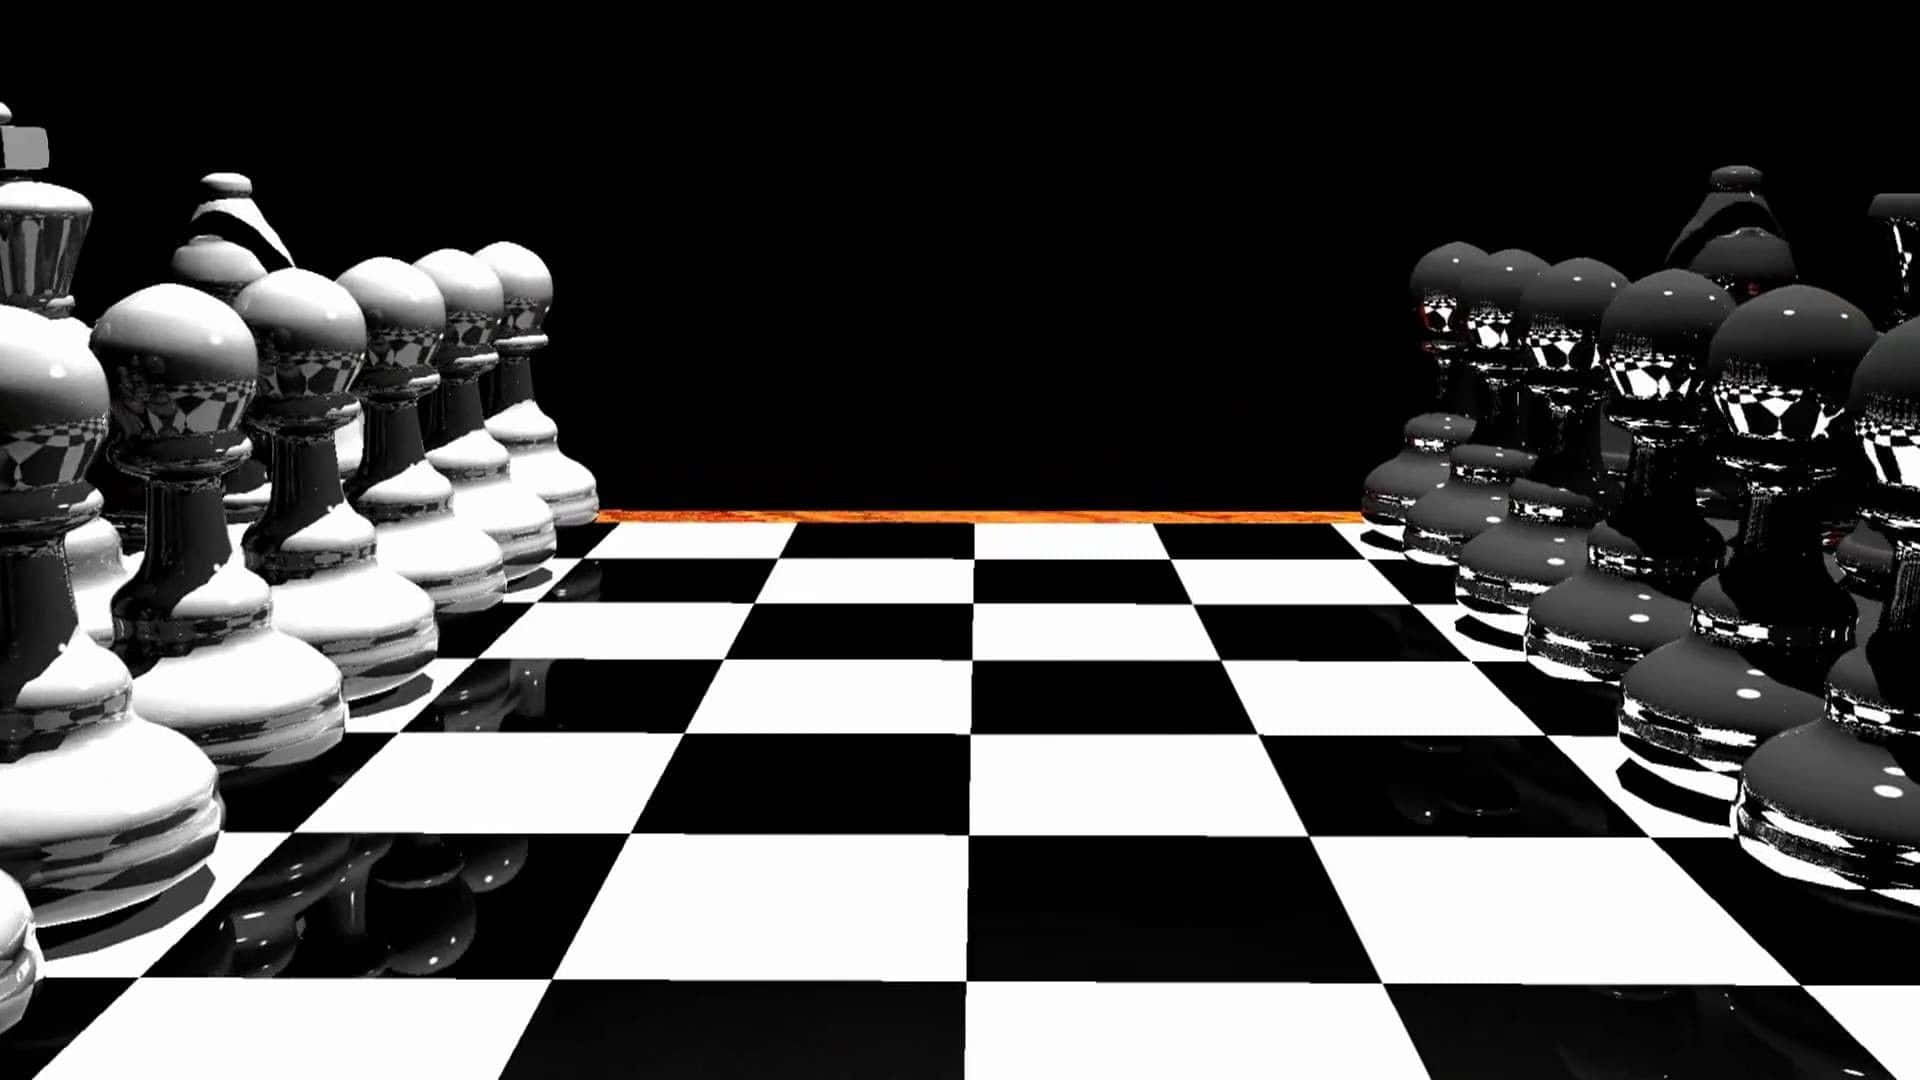 Two Knights Battling It Out in a Thrilling Chess Match